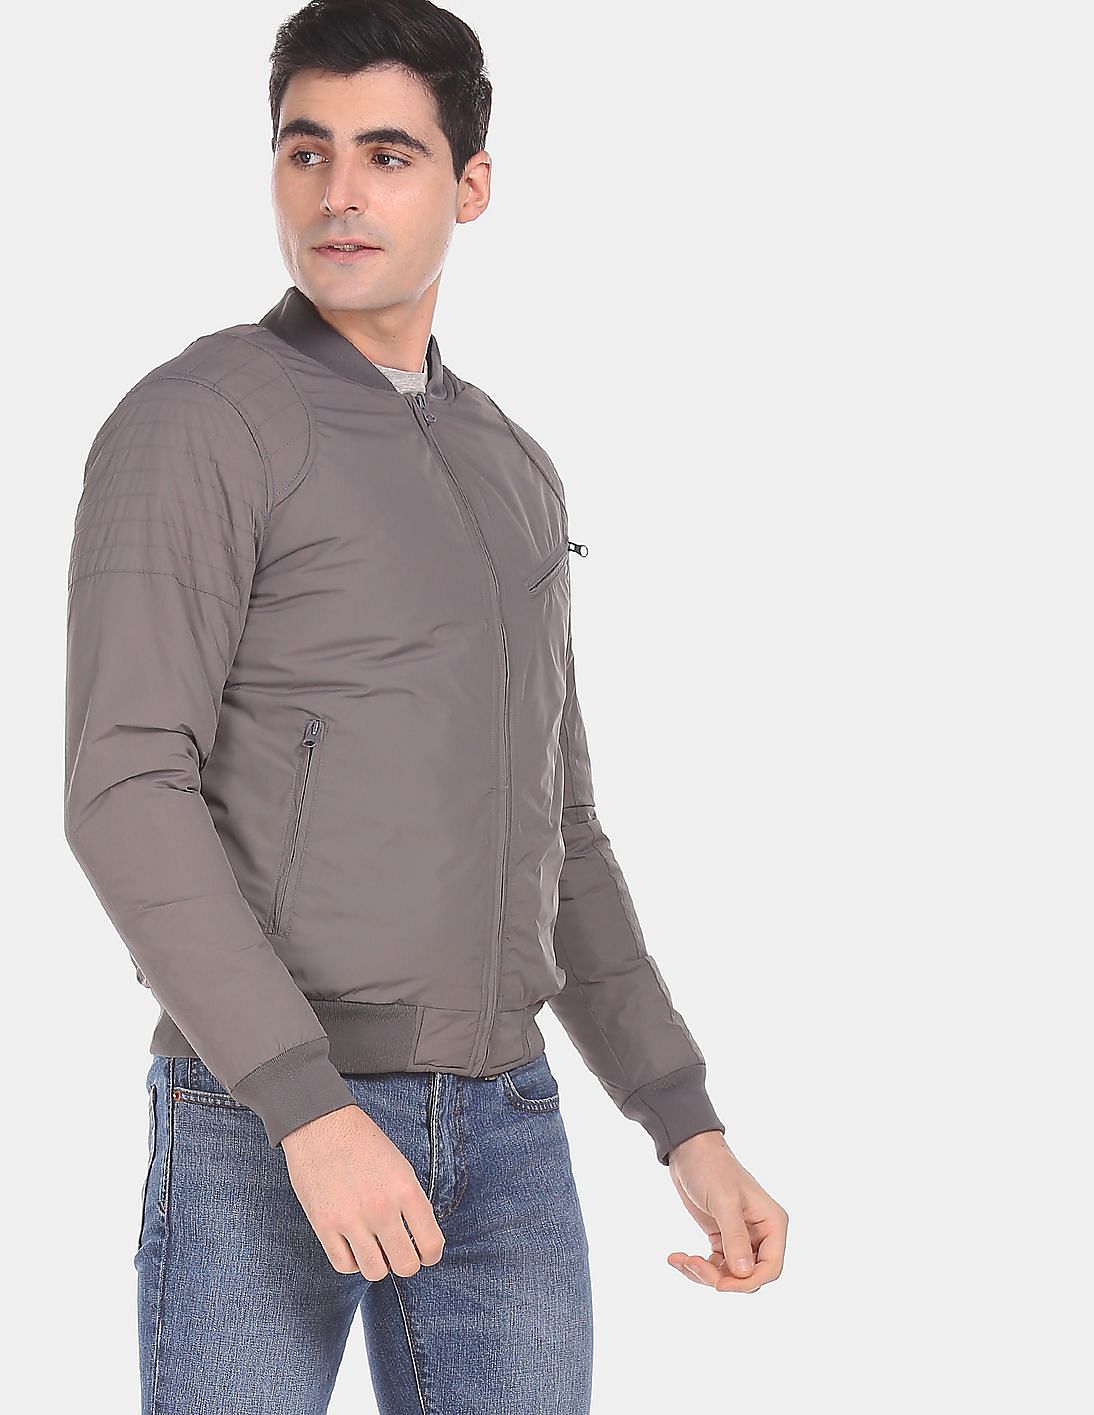 Buy U.S. Polo Assn. Men Grey Stand Collar Solid Bomber Jacket - NNNOW.com